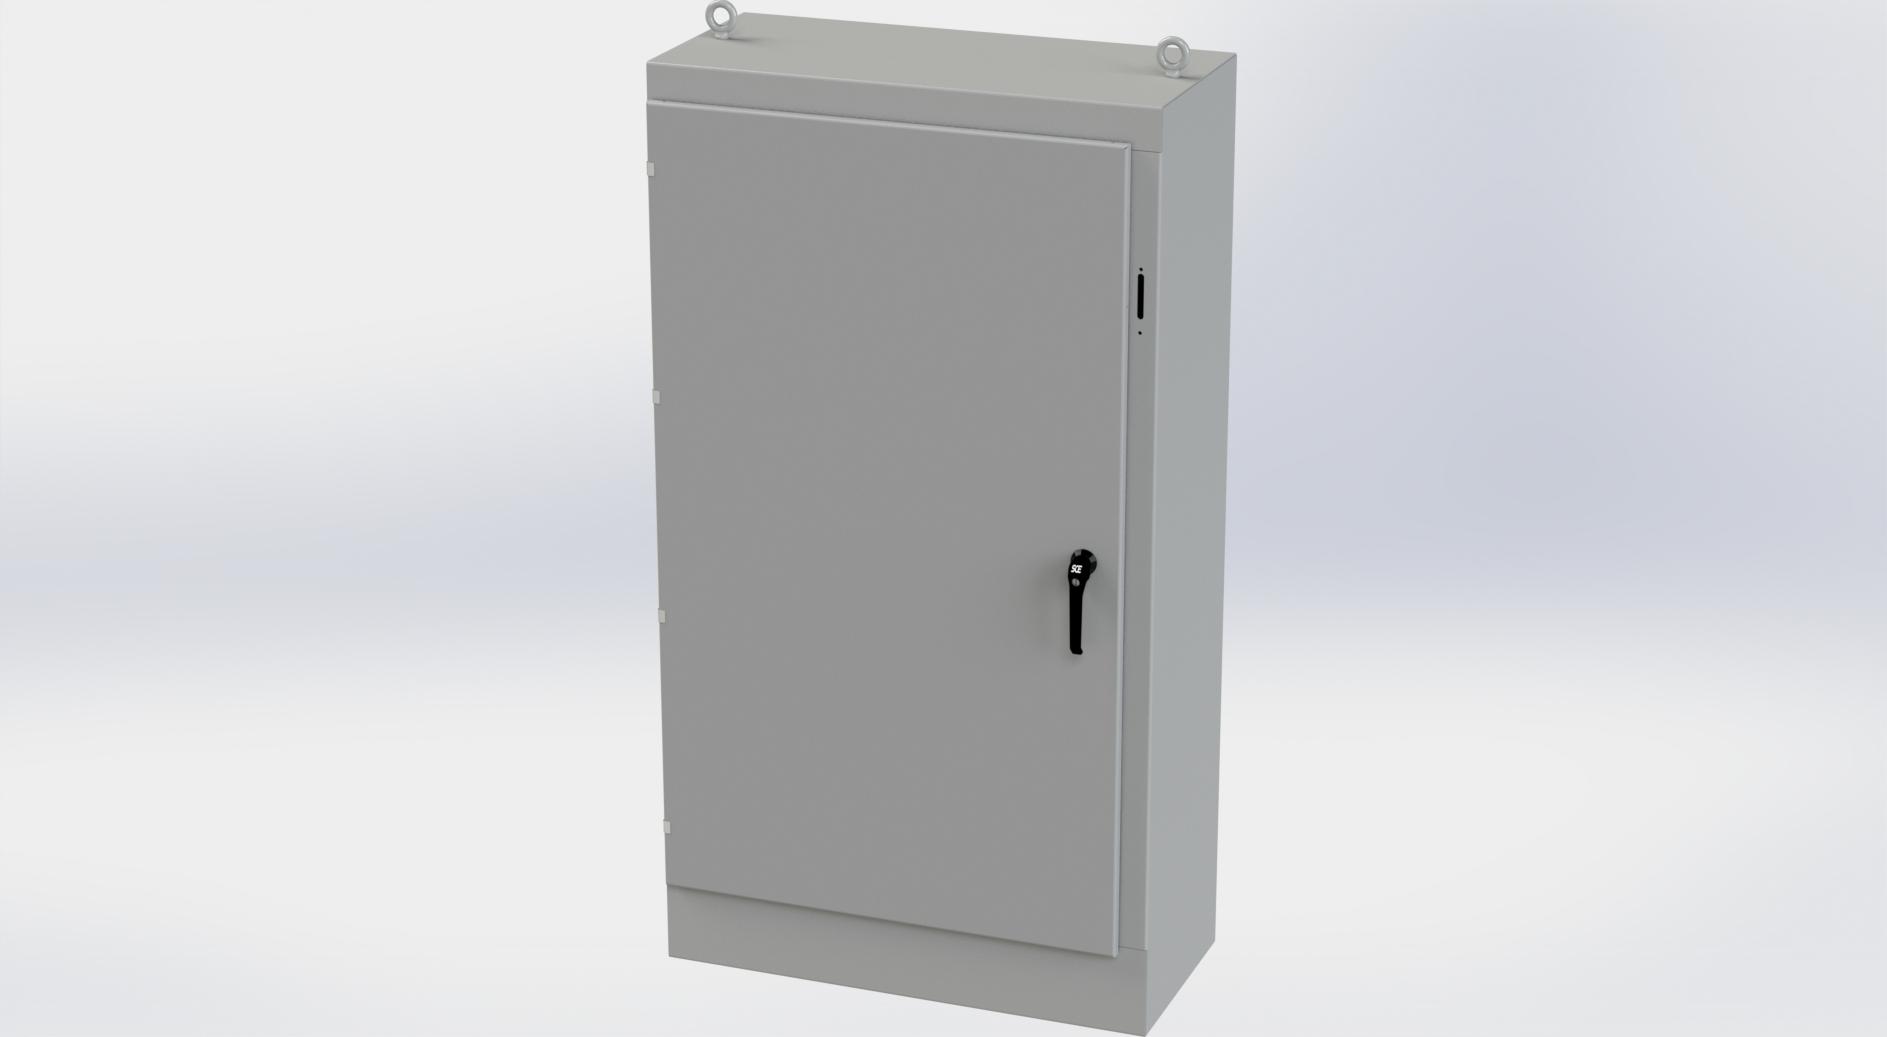 Saginaw Control SCE-72XM4018G 1DR XM Enclosure, Height:72.00", Width:39.50", Depth:18.00", ANSI-61 gray powder coating inside and out. Sub-panels are powder coated white.  